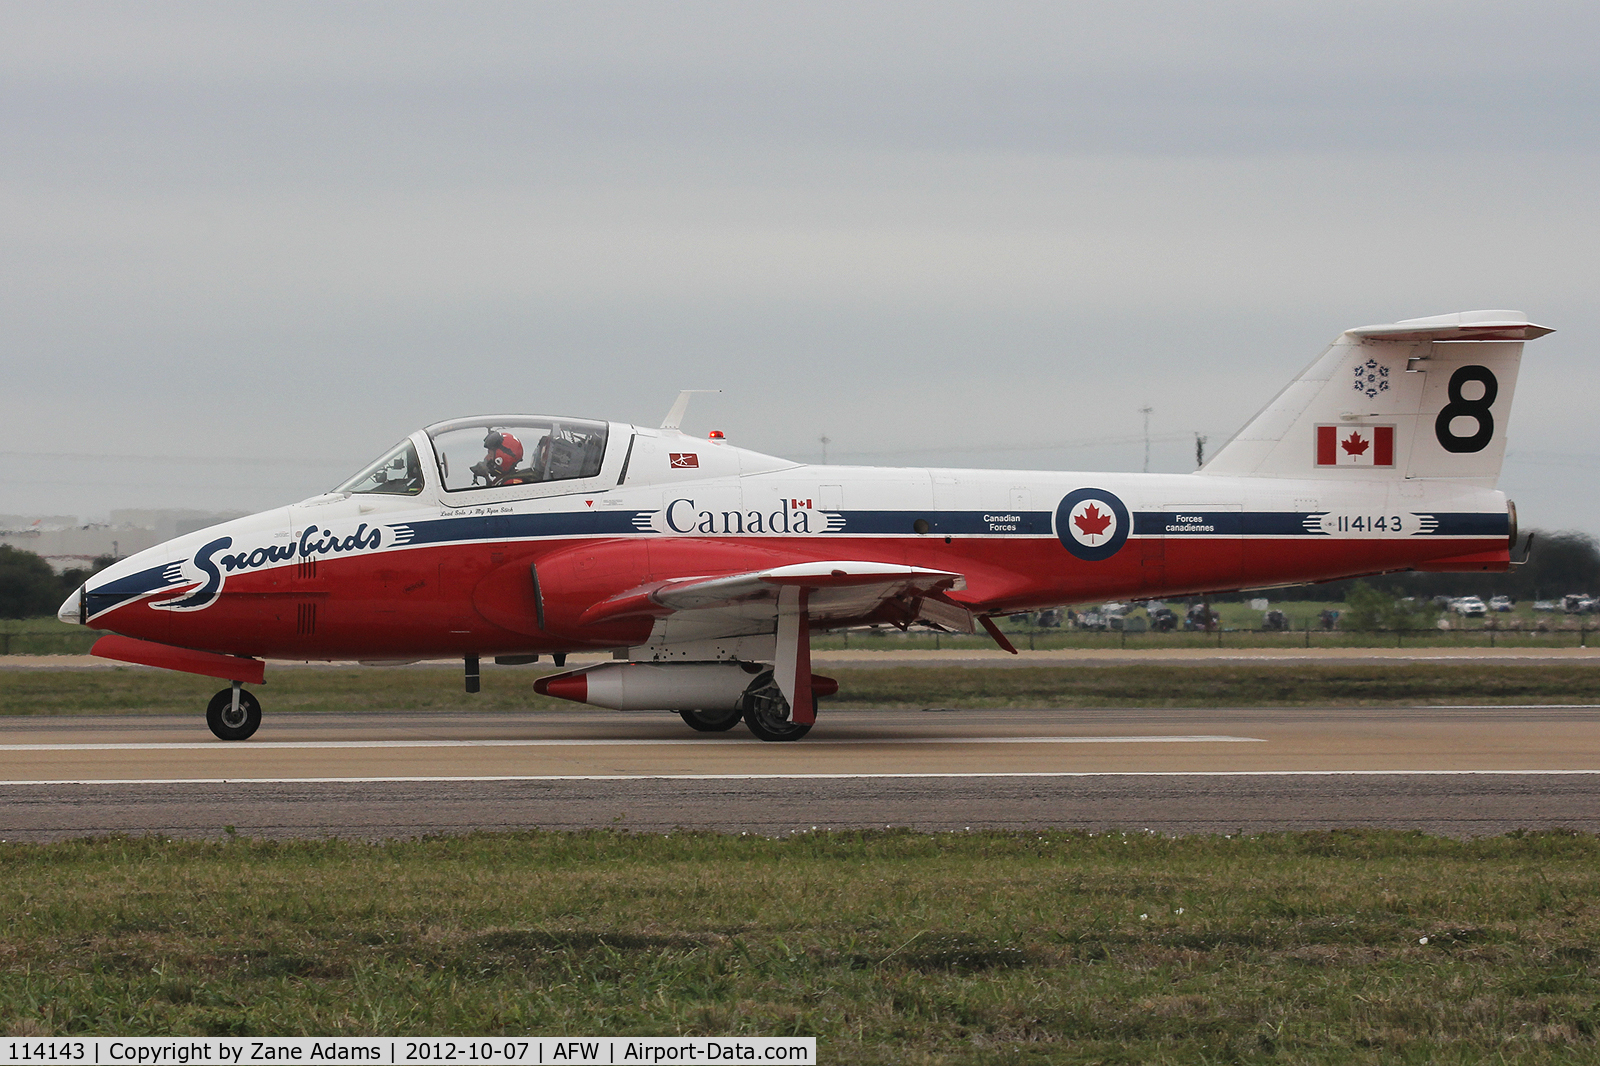 114143, Canadair CT-114 Tutor C/N 1143, At the 2012 Alliance Airshow - Fort Worth, TX